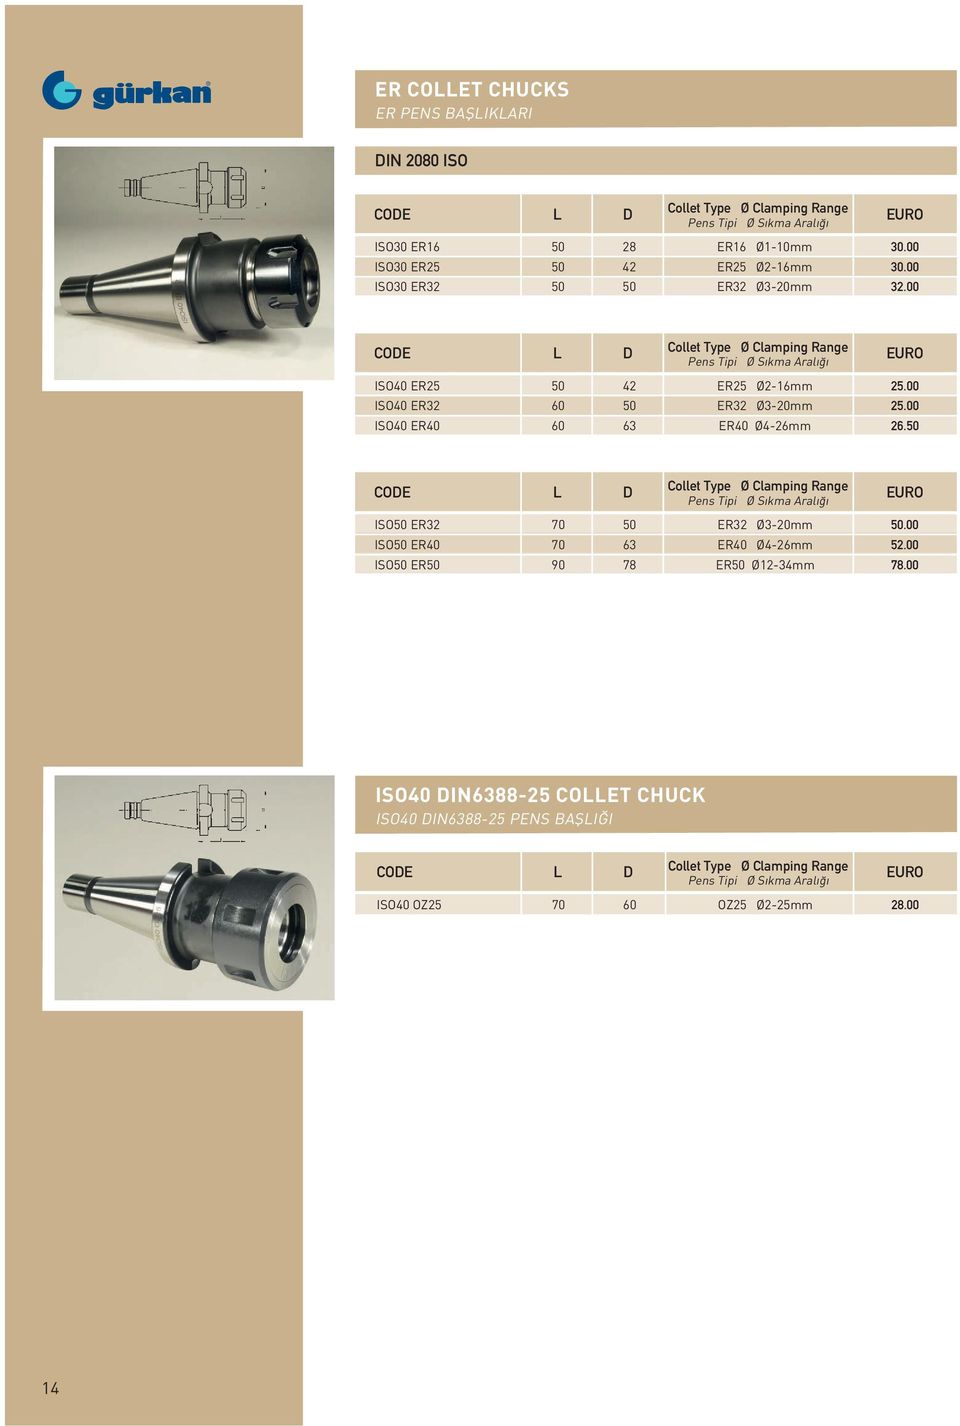 00 Collet Type Clamping Range Pens Tipi S kma Aral ISO ER25 ISO ER32 ISO ER 42 ER25 2-16mm ER32 3-20mm ER 4-26mm 26.